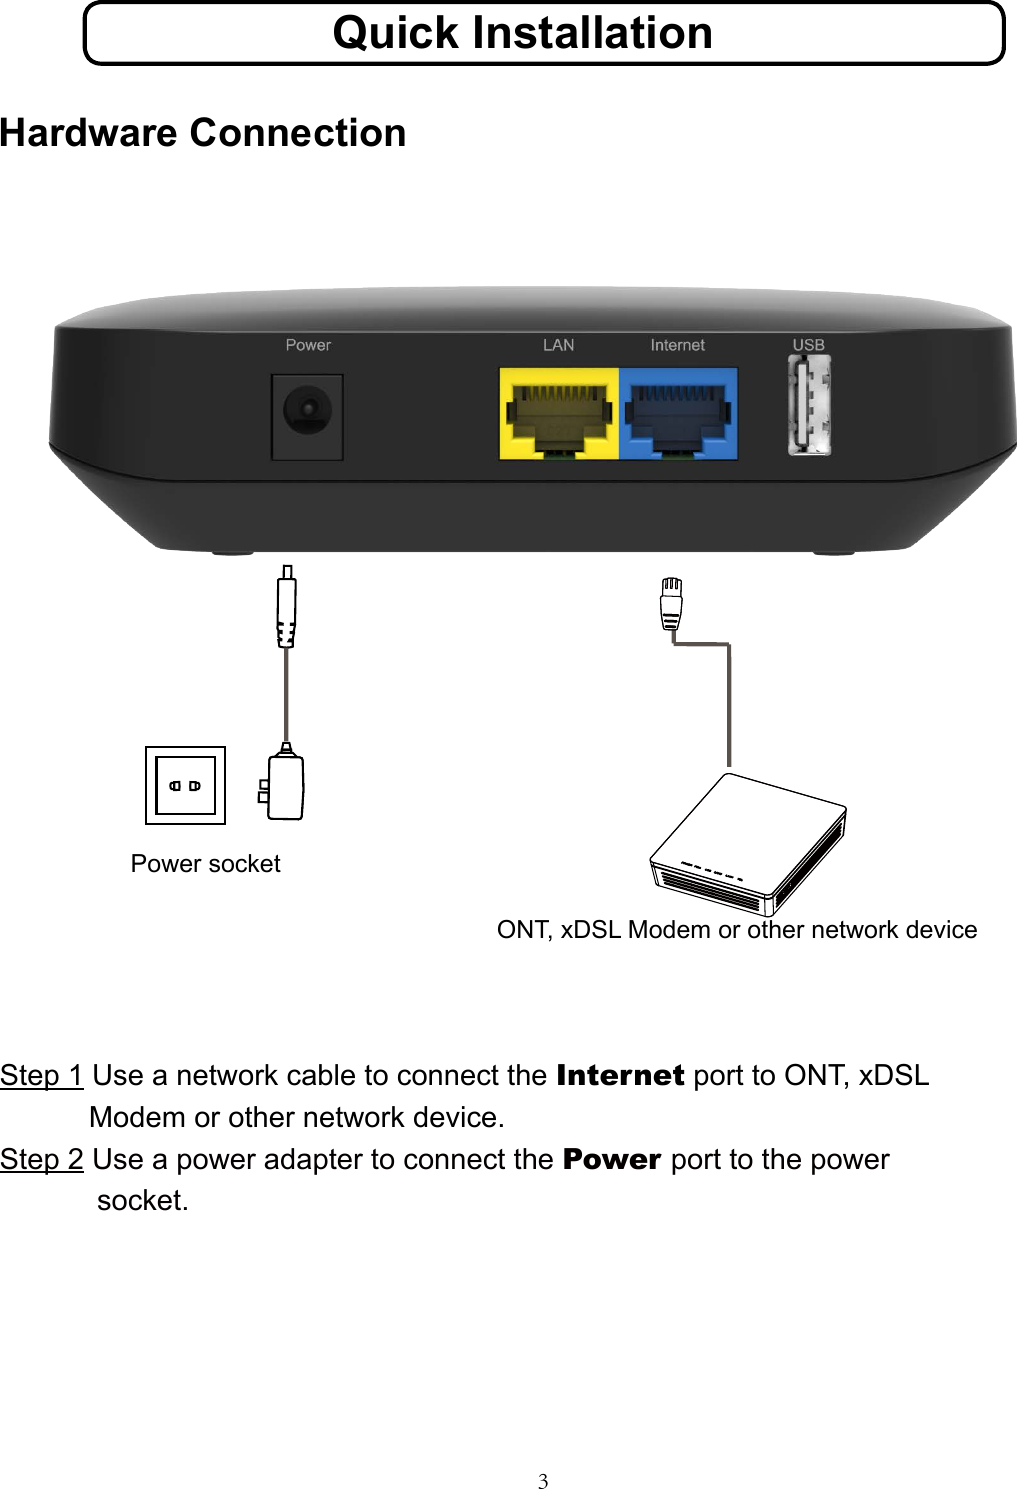 Hardware Connection3Quick InstallationONT, xDSL Modem or other network devicePower socket Step 1 Use a network cable to connect the Internet port to ONT, xDSL              Modem or other network device.Step 2 Use a power adapter to connect the Power port to the power             socket.